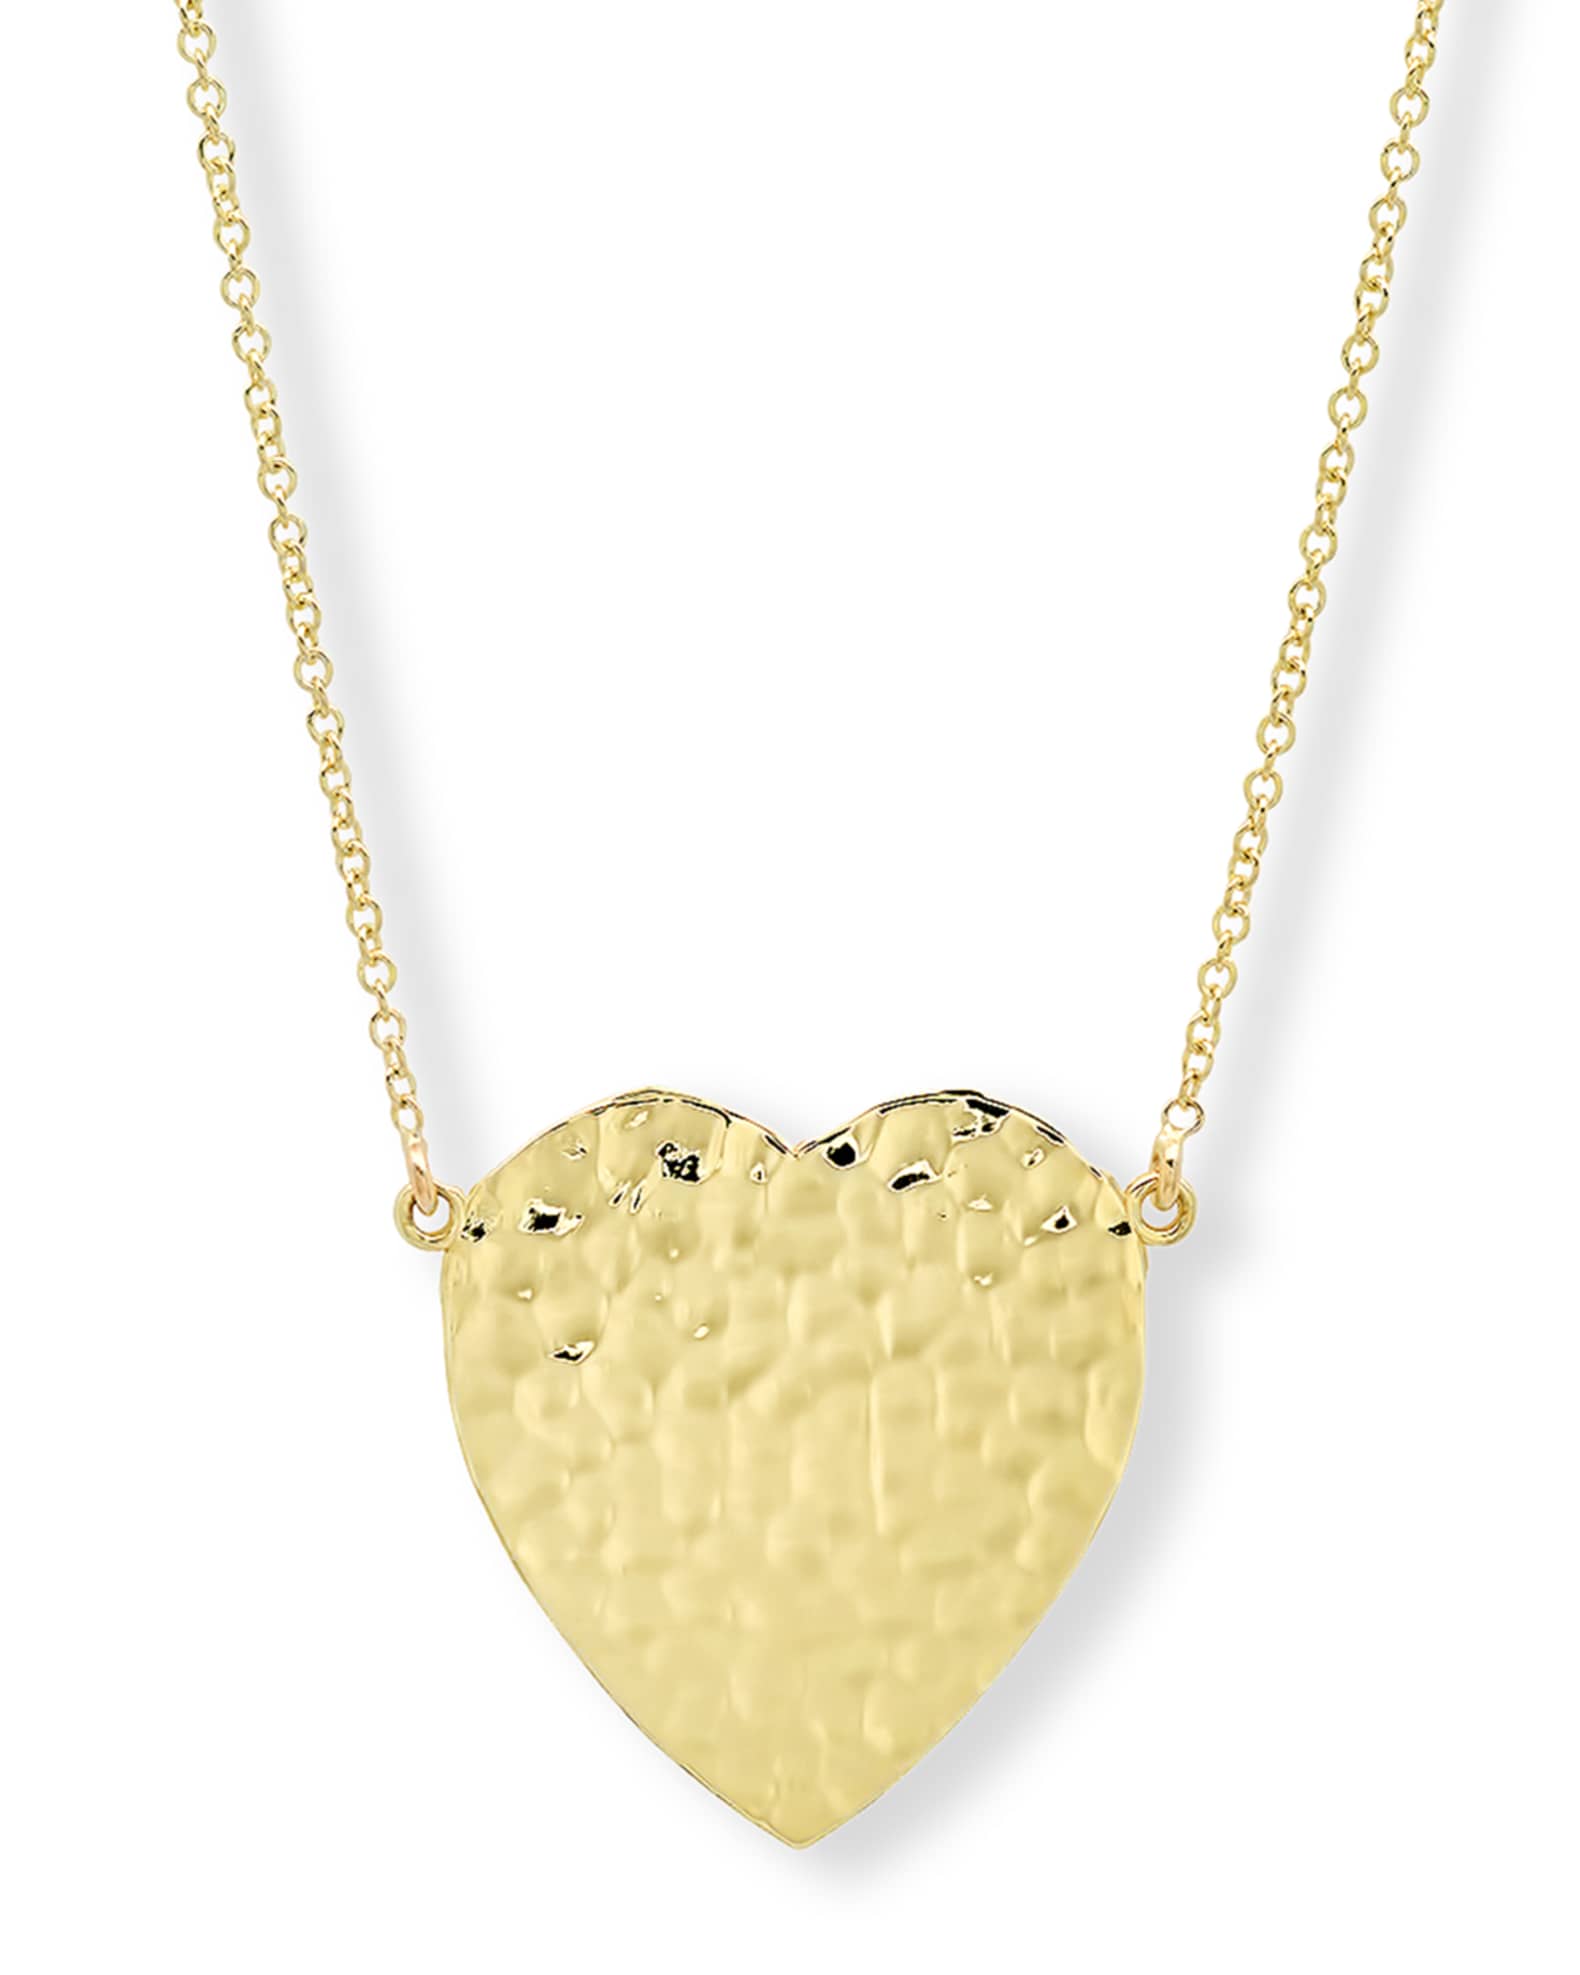 Hammered Heart Necklace for Women